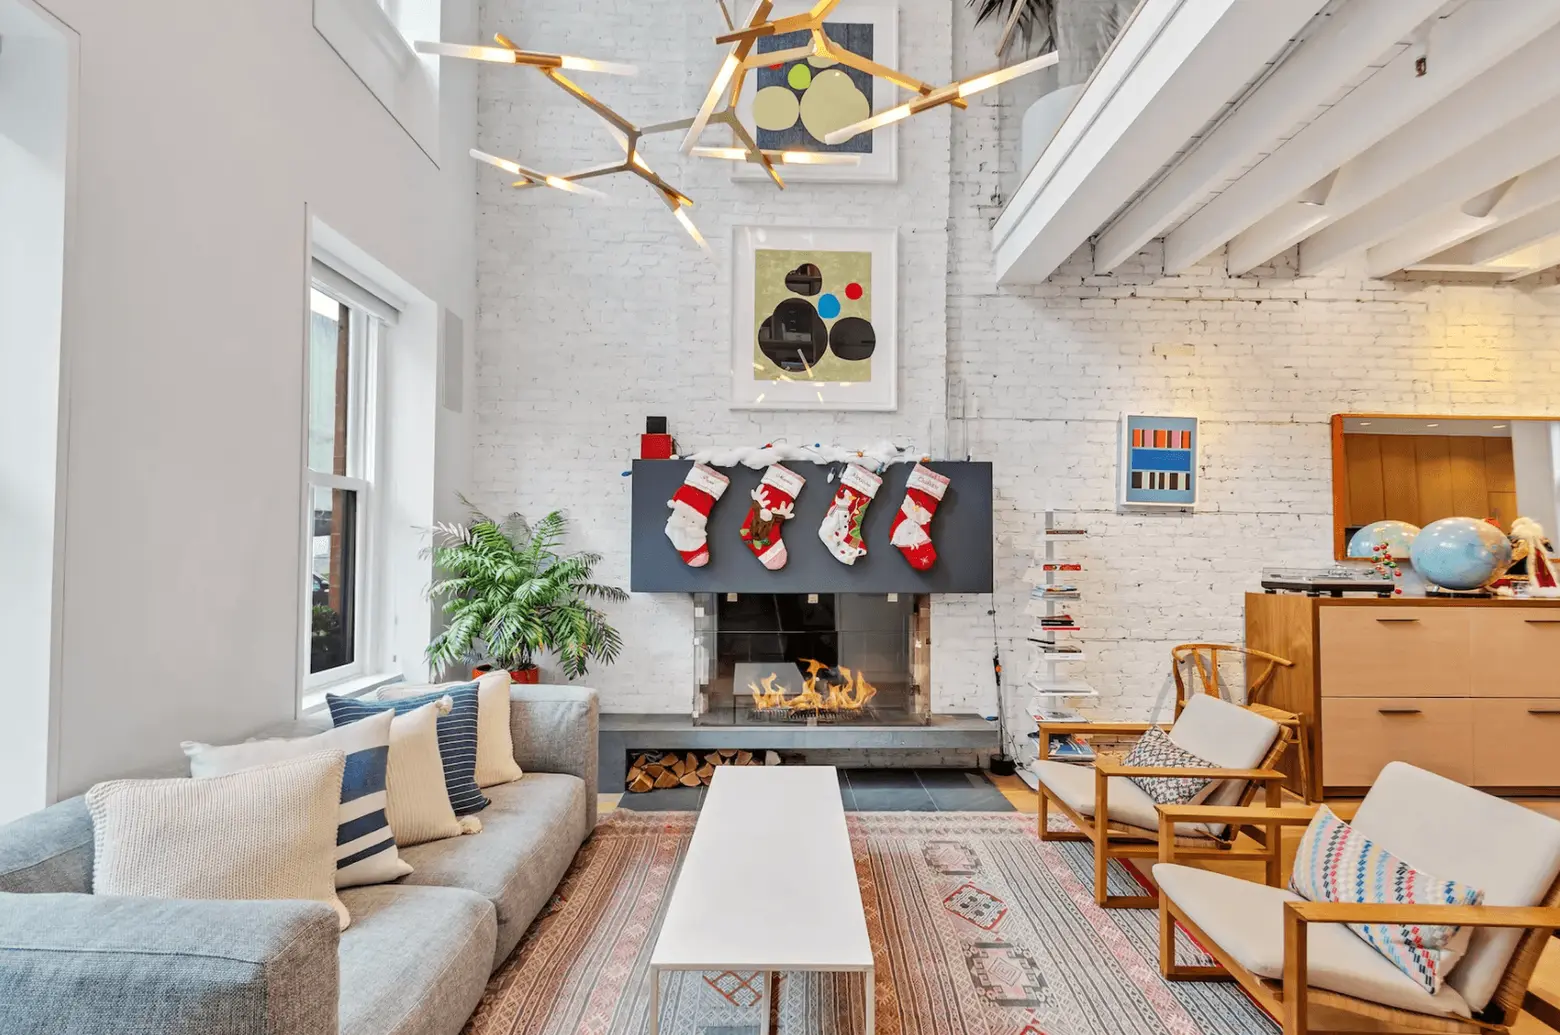 It’s feeling festive at this revamped Williamsburg townhouse asking $3.7M